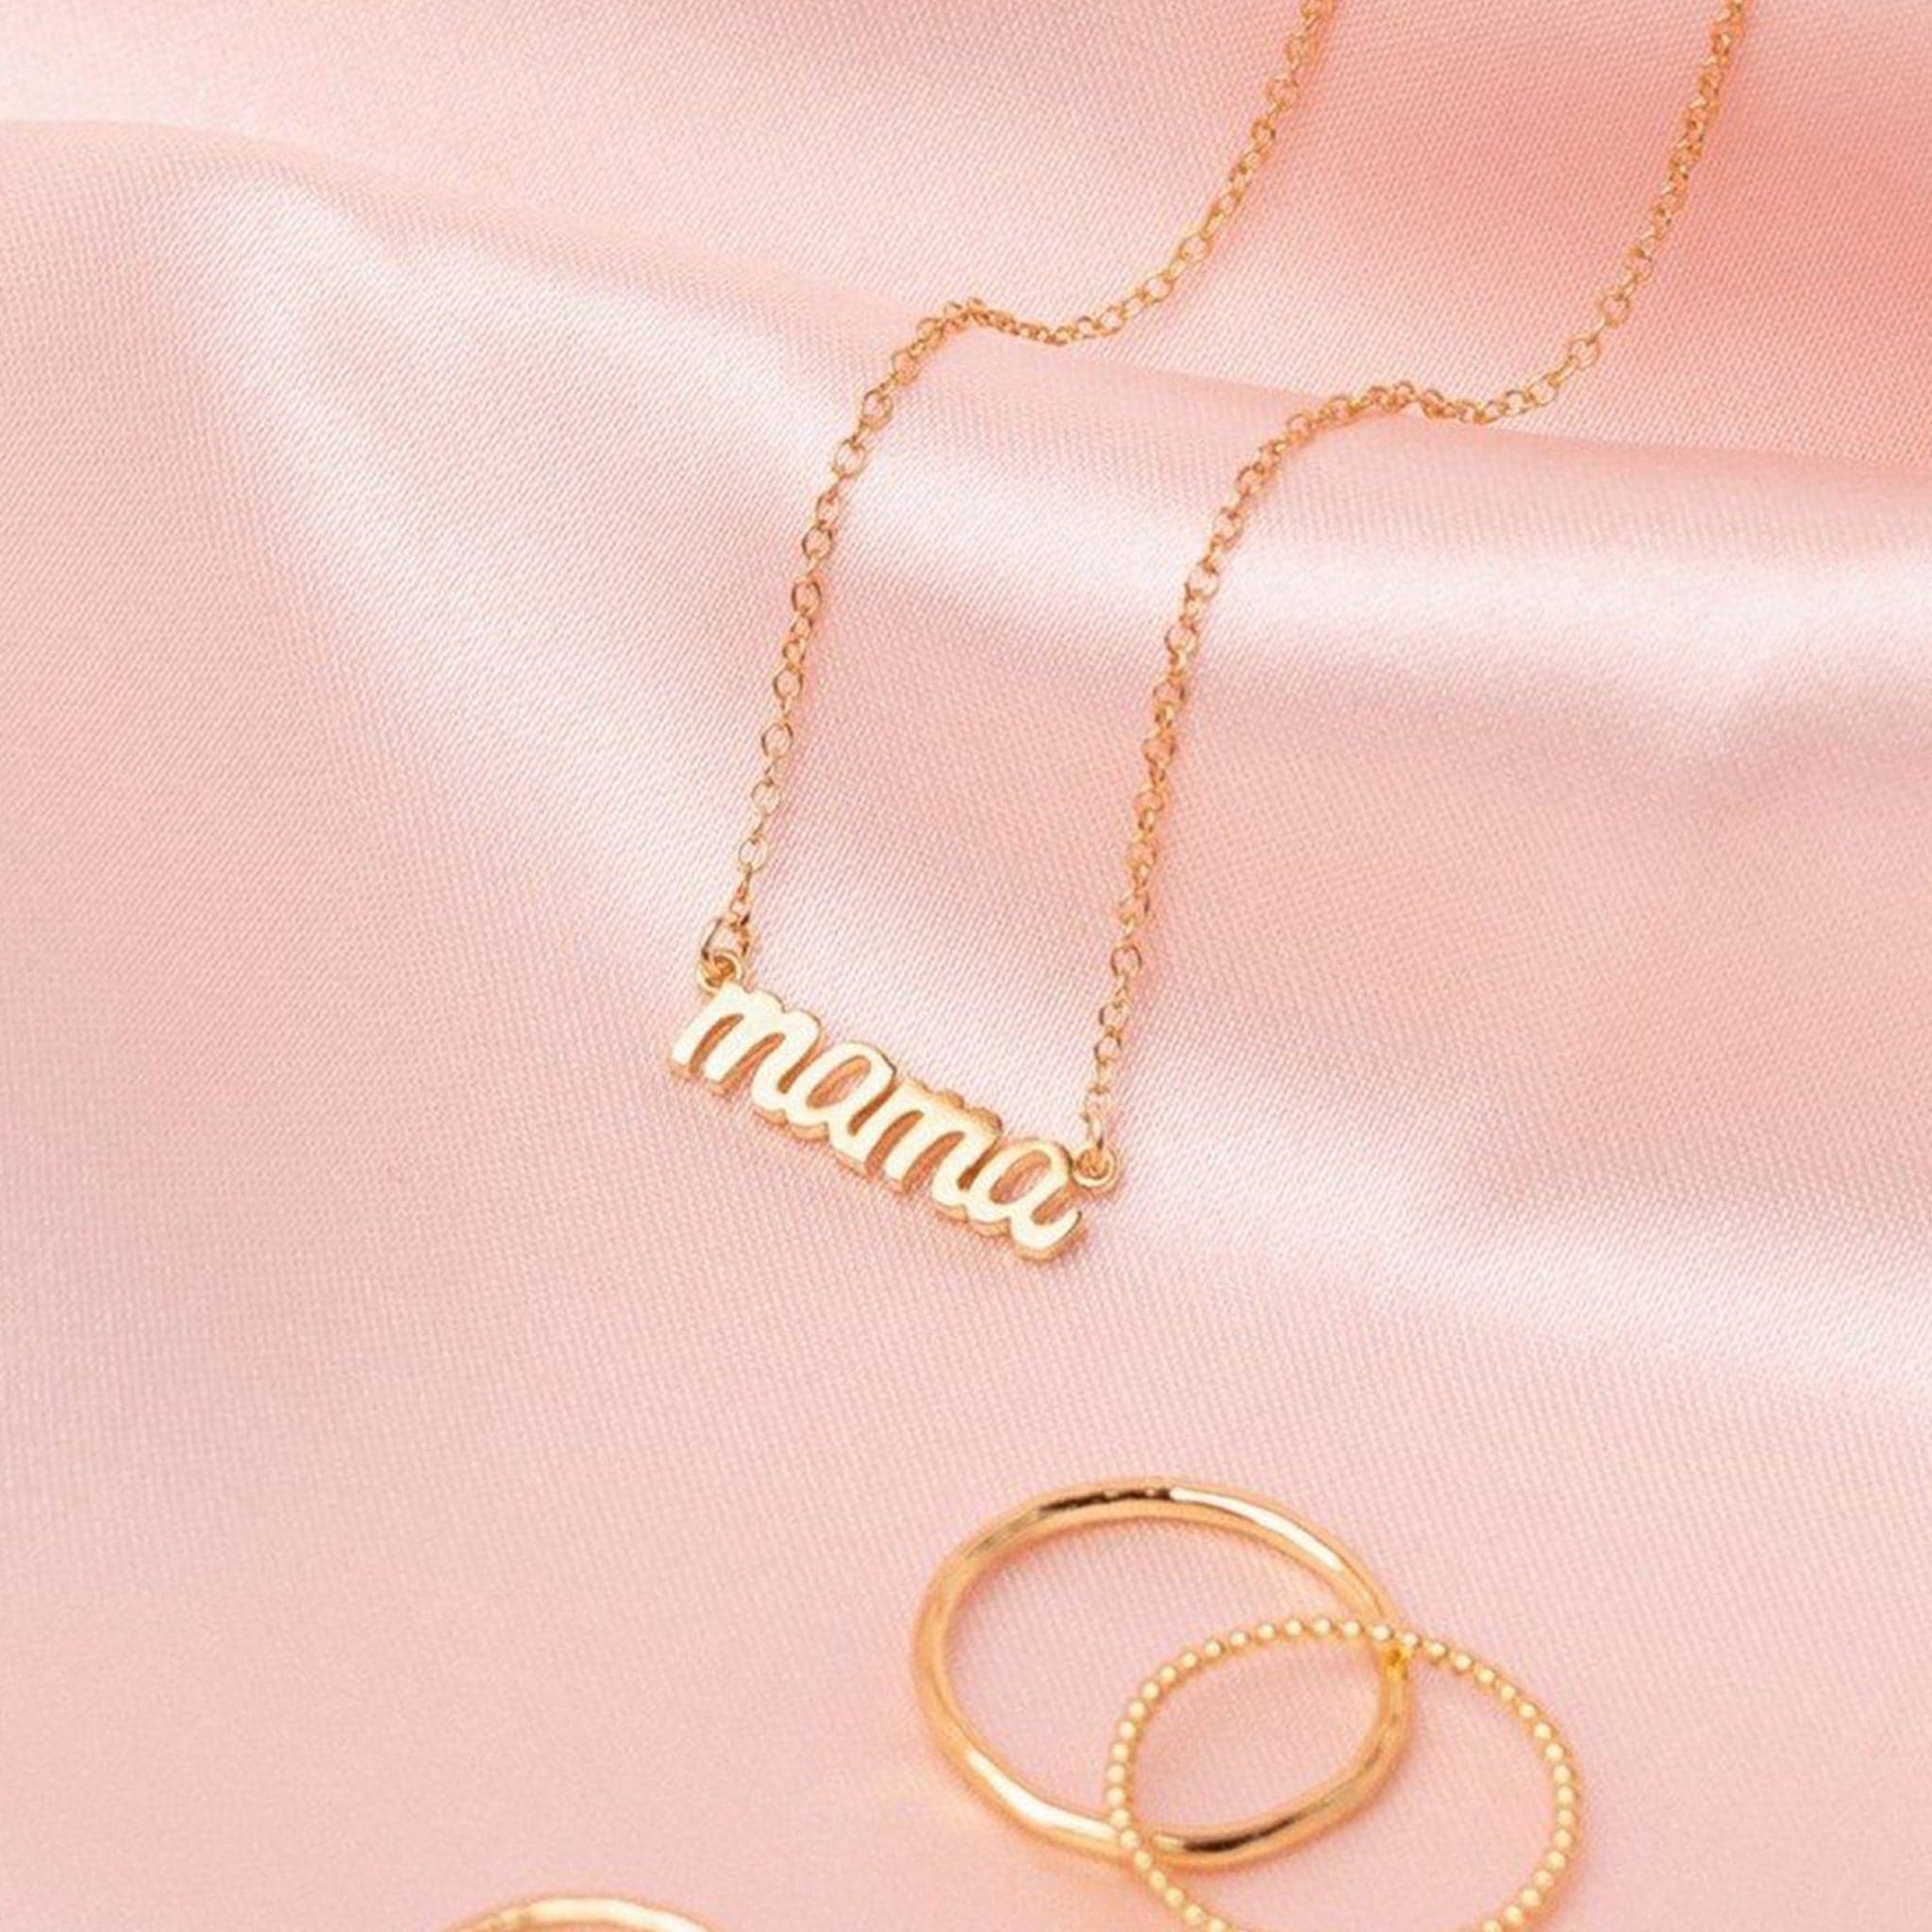 A dainty chain necklace with a small &quot;mama&quot; charm.